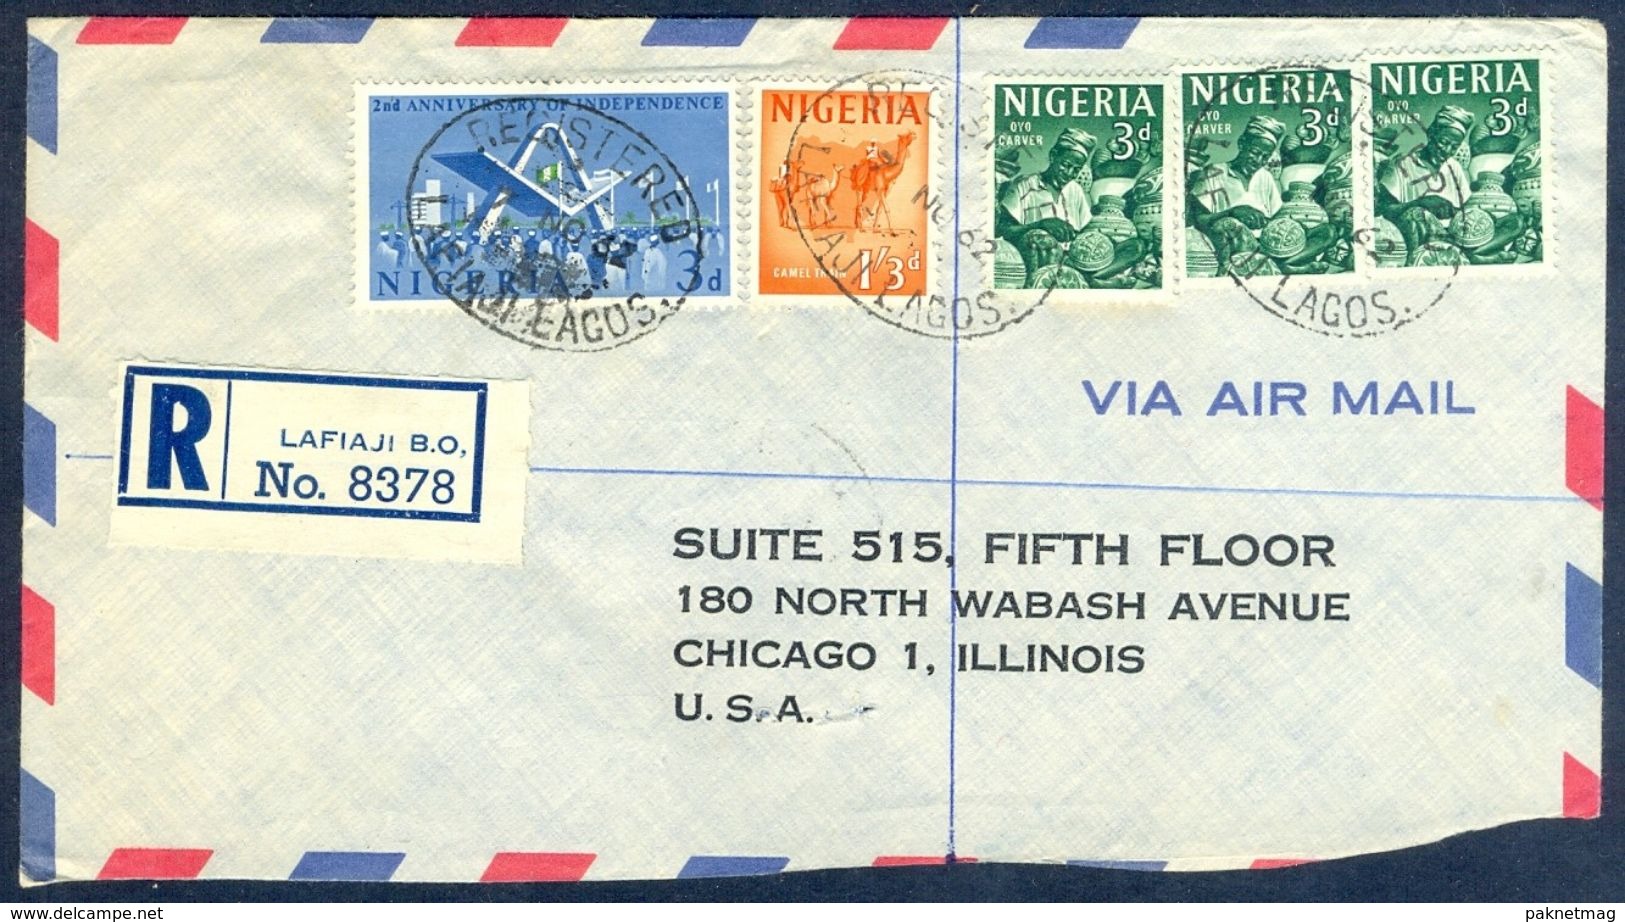 G68- Postal Used Cover. Posted From Nigeria To USA. Oyo Carver. Camel. 2nd Anvi Of Independence. - Nigeria (1961-...)